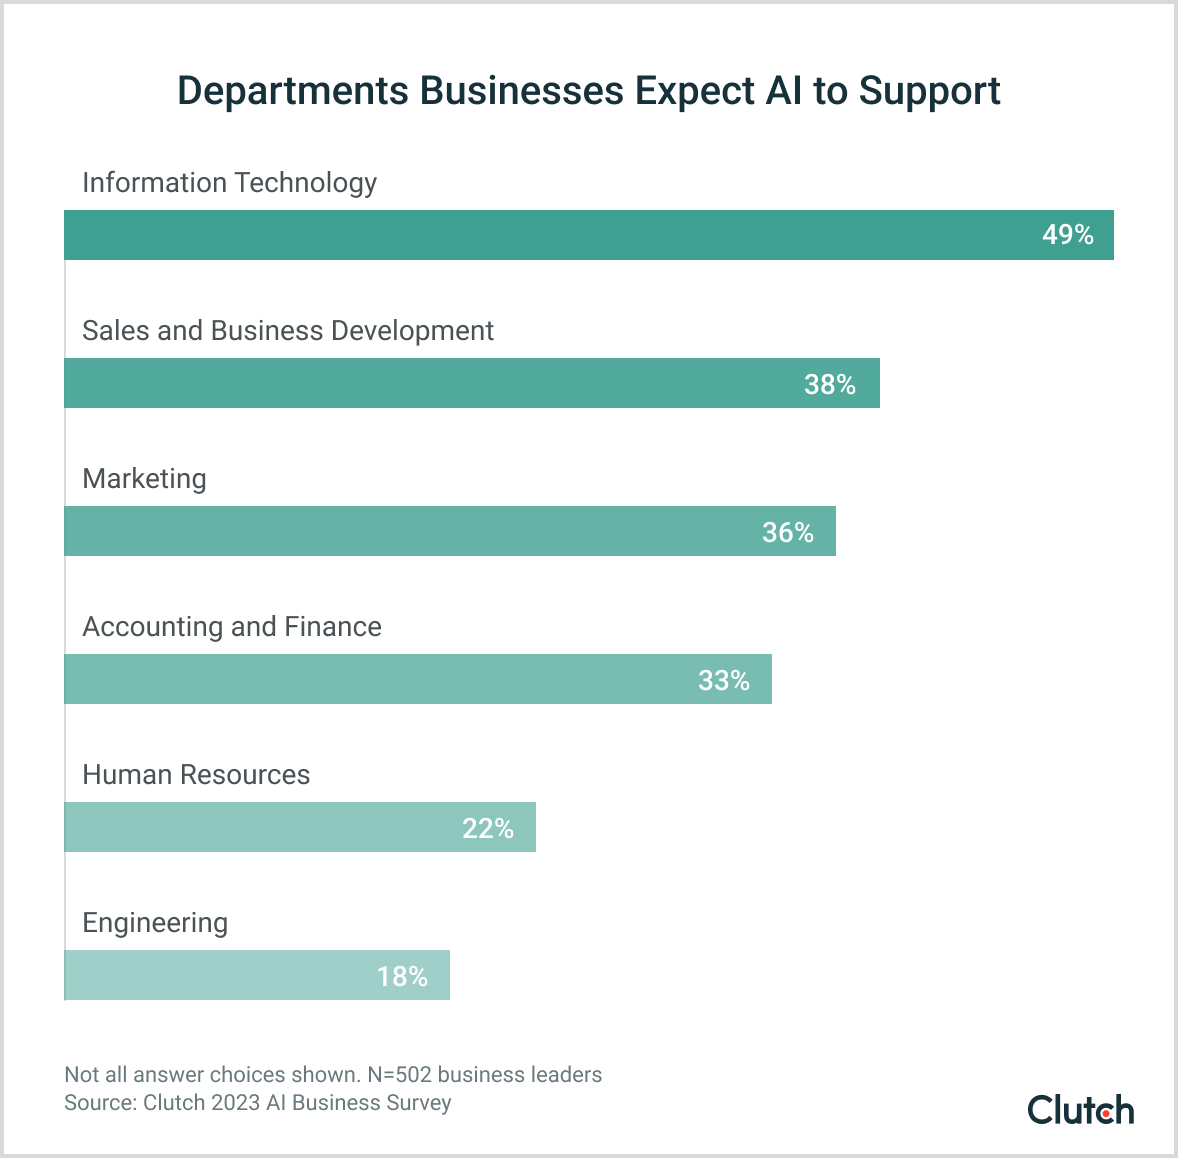 Departments businesses expect AI to support in the future